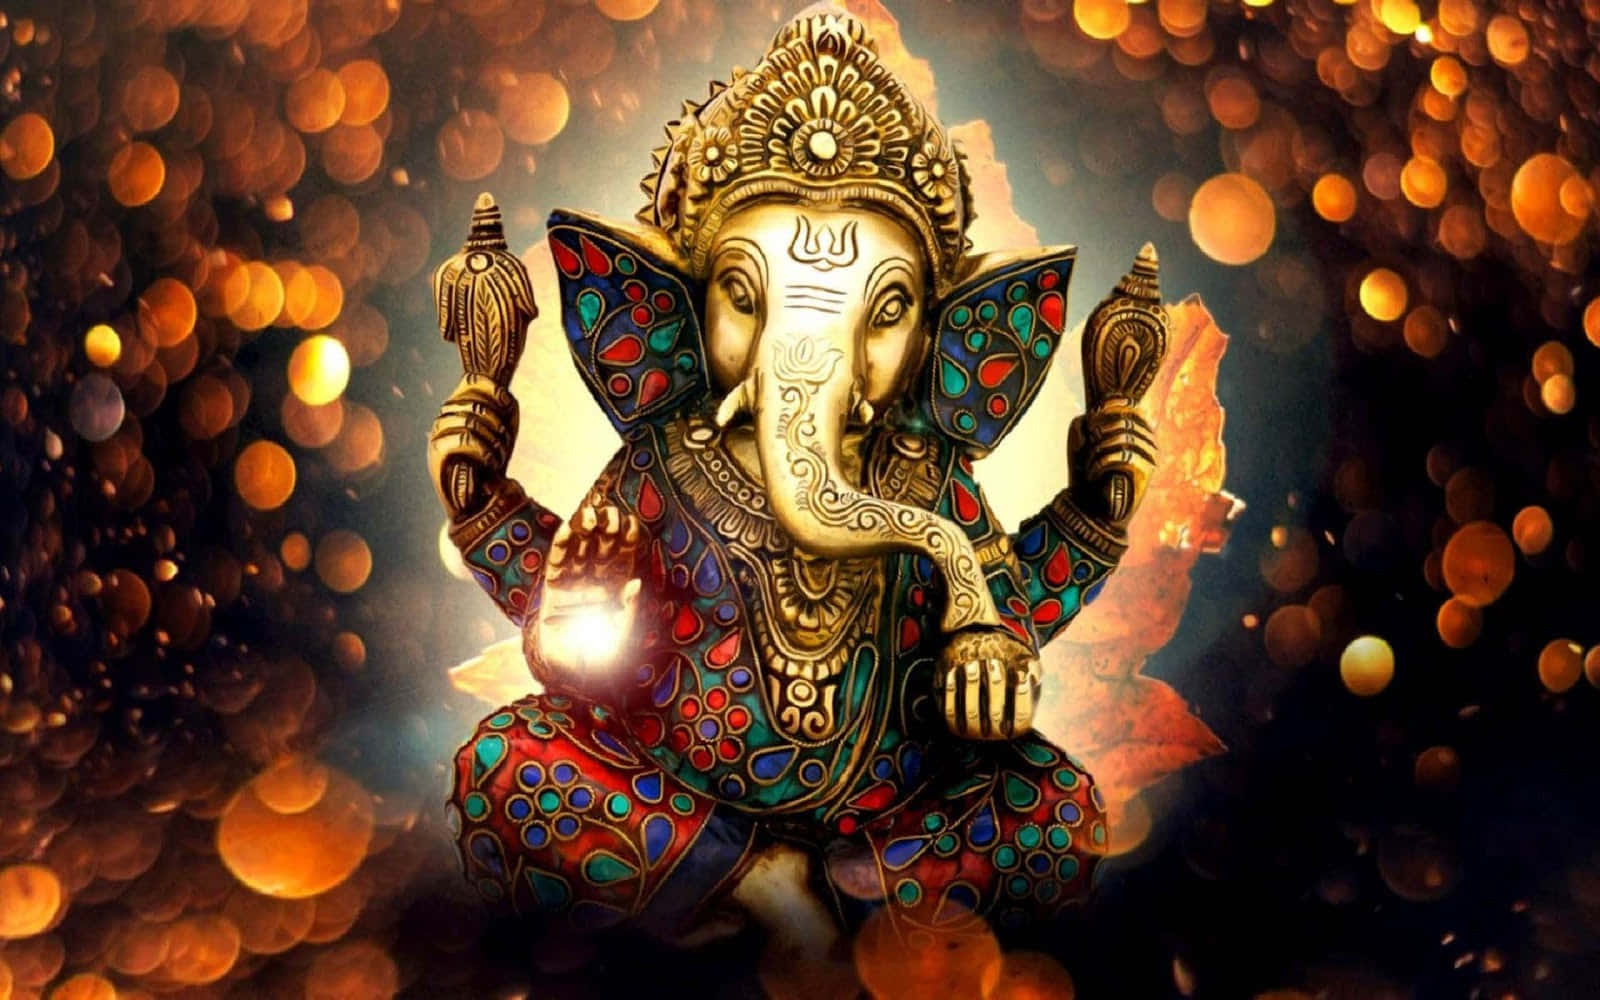 Celebrate Ganesh festival with the beautiful Lord Ganesh!